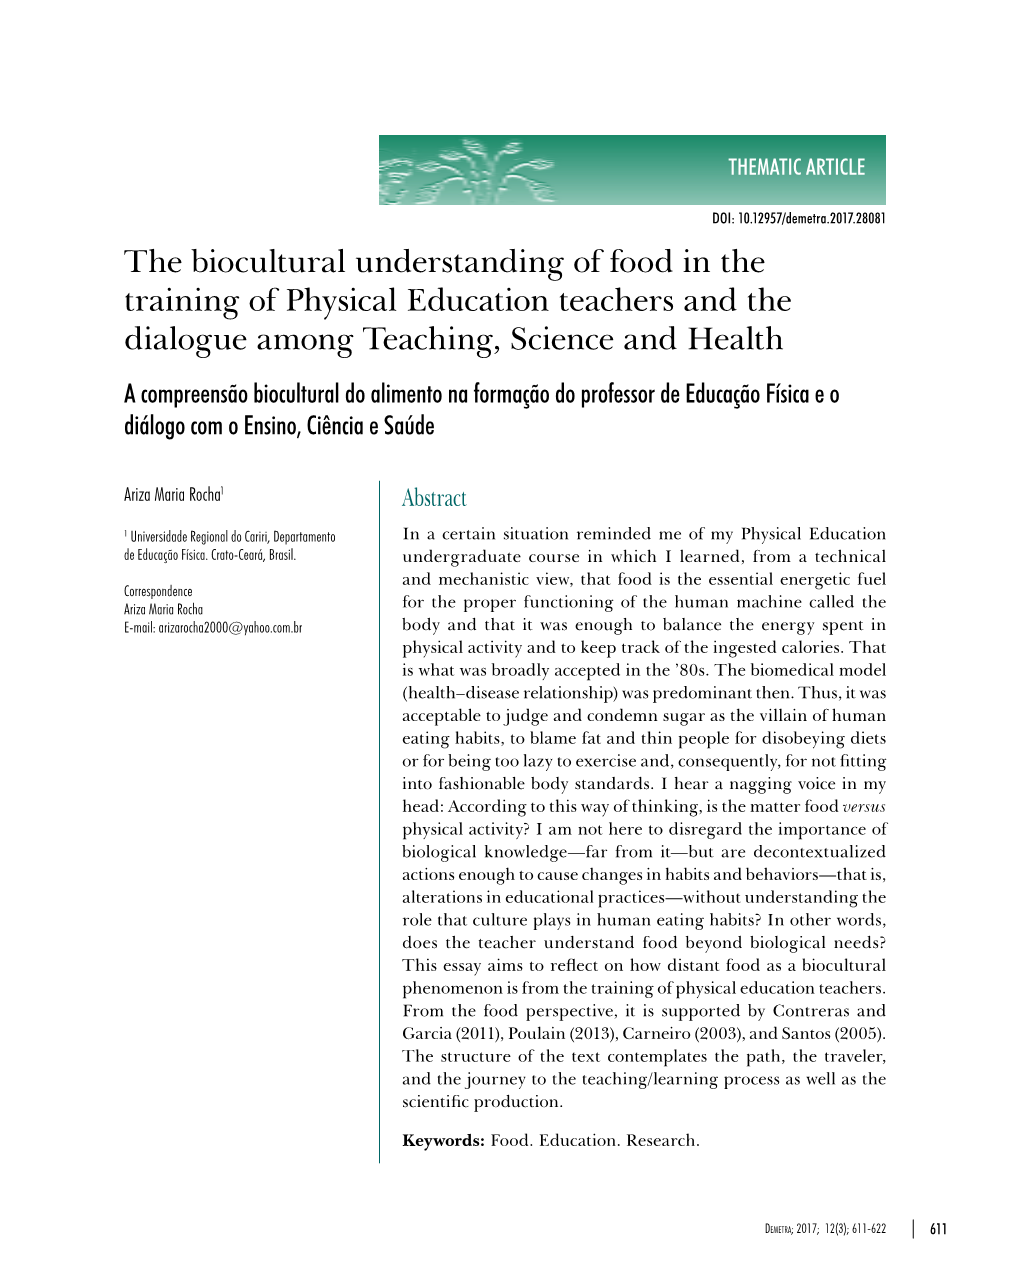 The Biocultural Understanding of Food in the Training of Physical Education